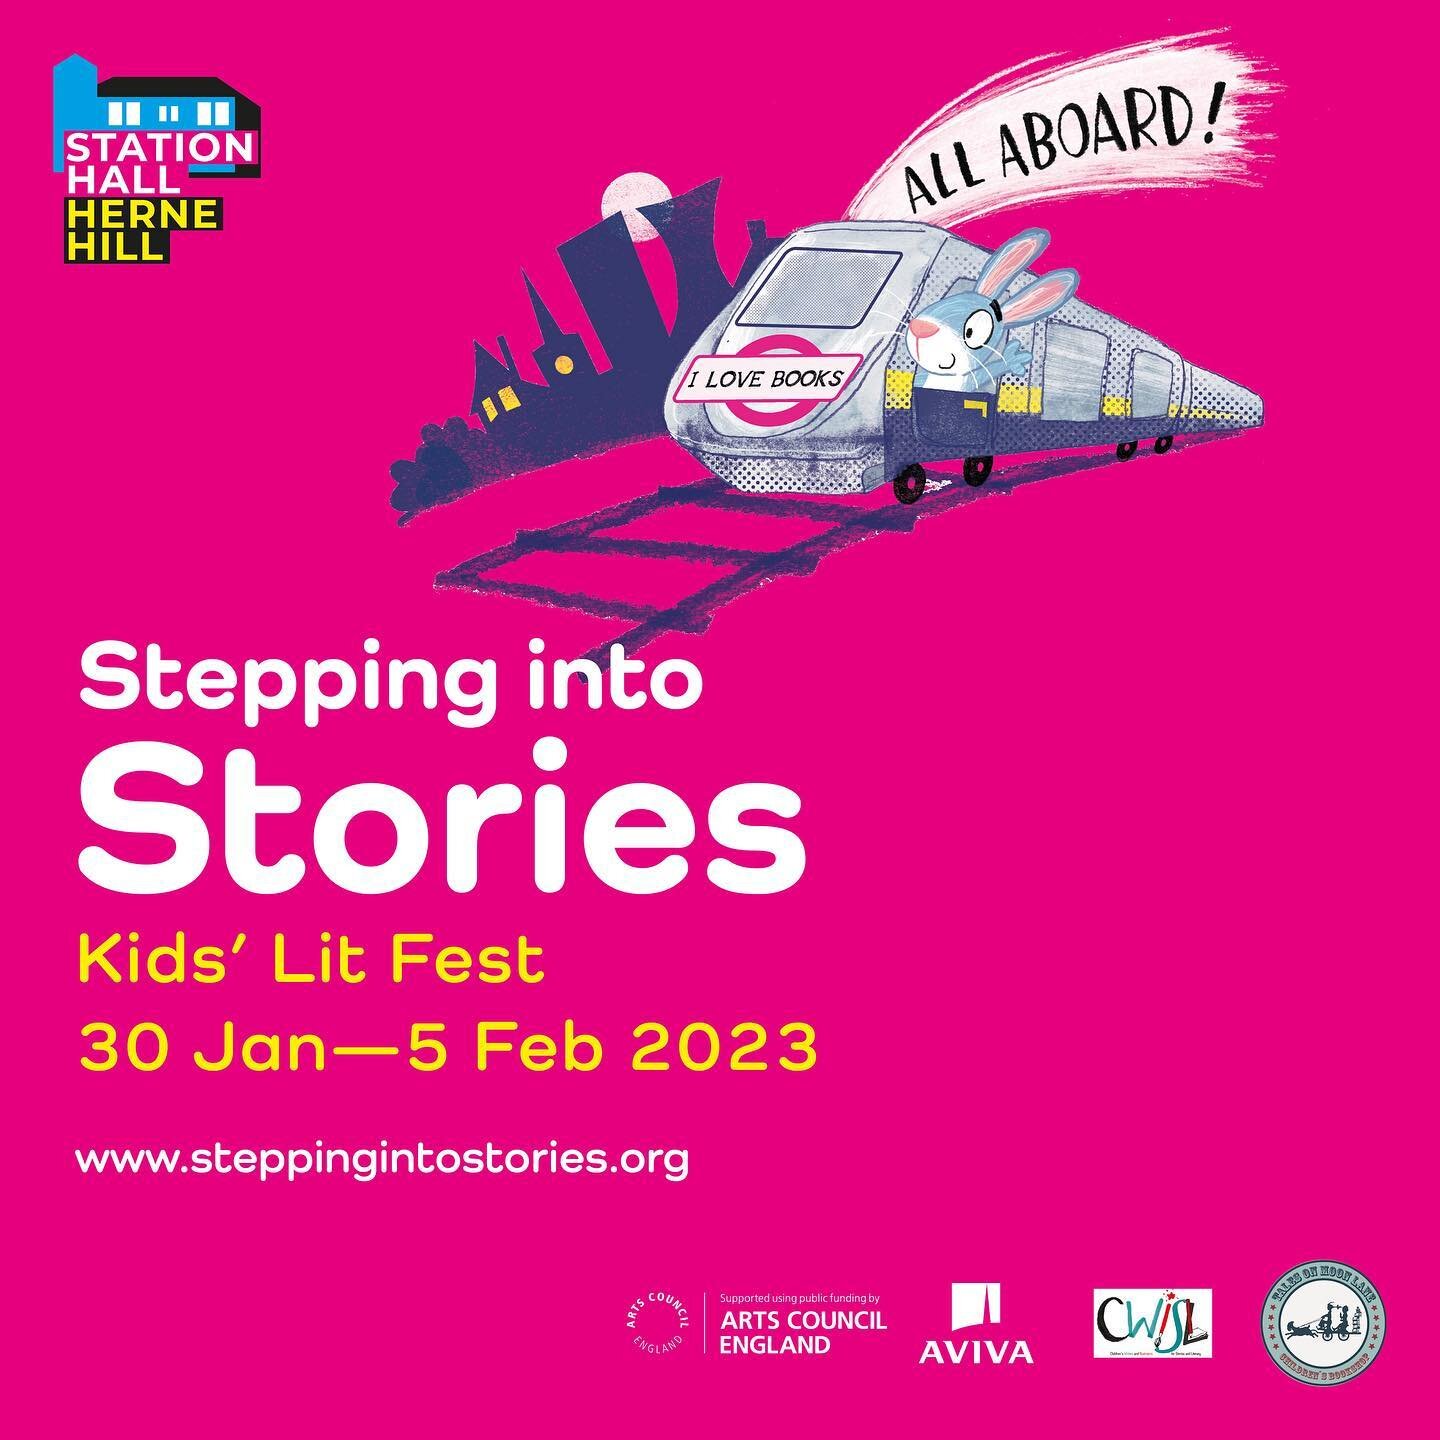 It&rsquo;s that time of year again! 🙌Following another knockout festival in 2022, attended by 2000+ participants, the Stepping Into Stories Kids&rsquo; Lit Fest is back in Herne Hill, London, from 30th Jan - 5th Feb 2023! And tickets are on sale TOD